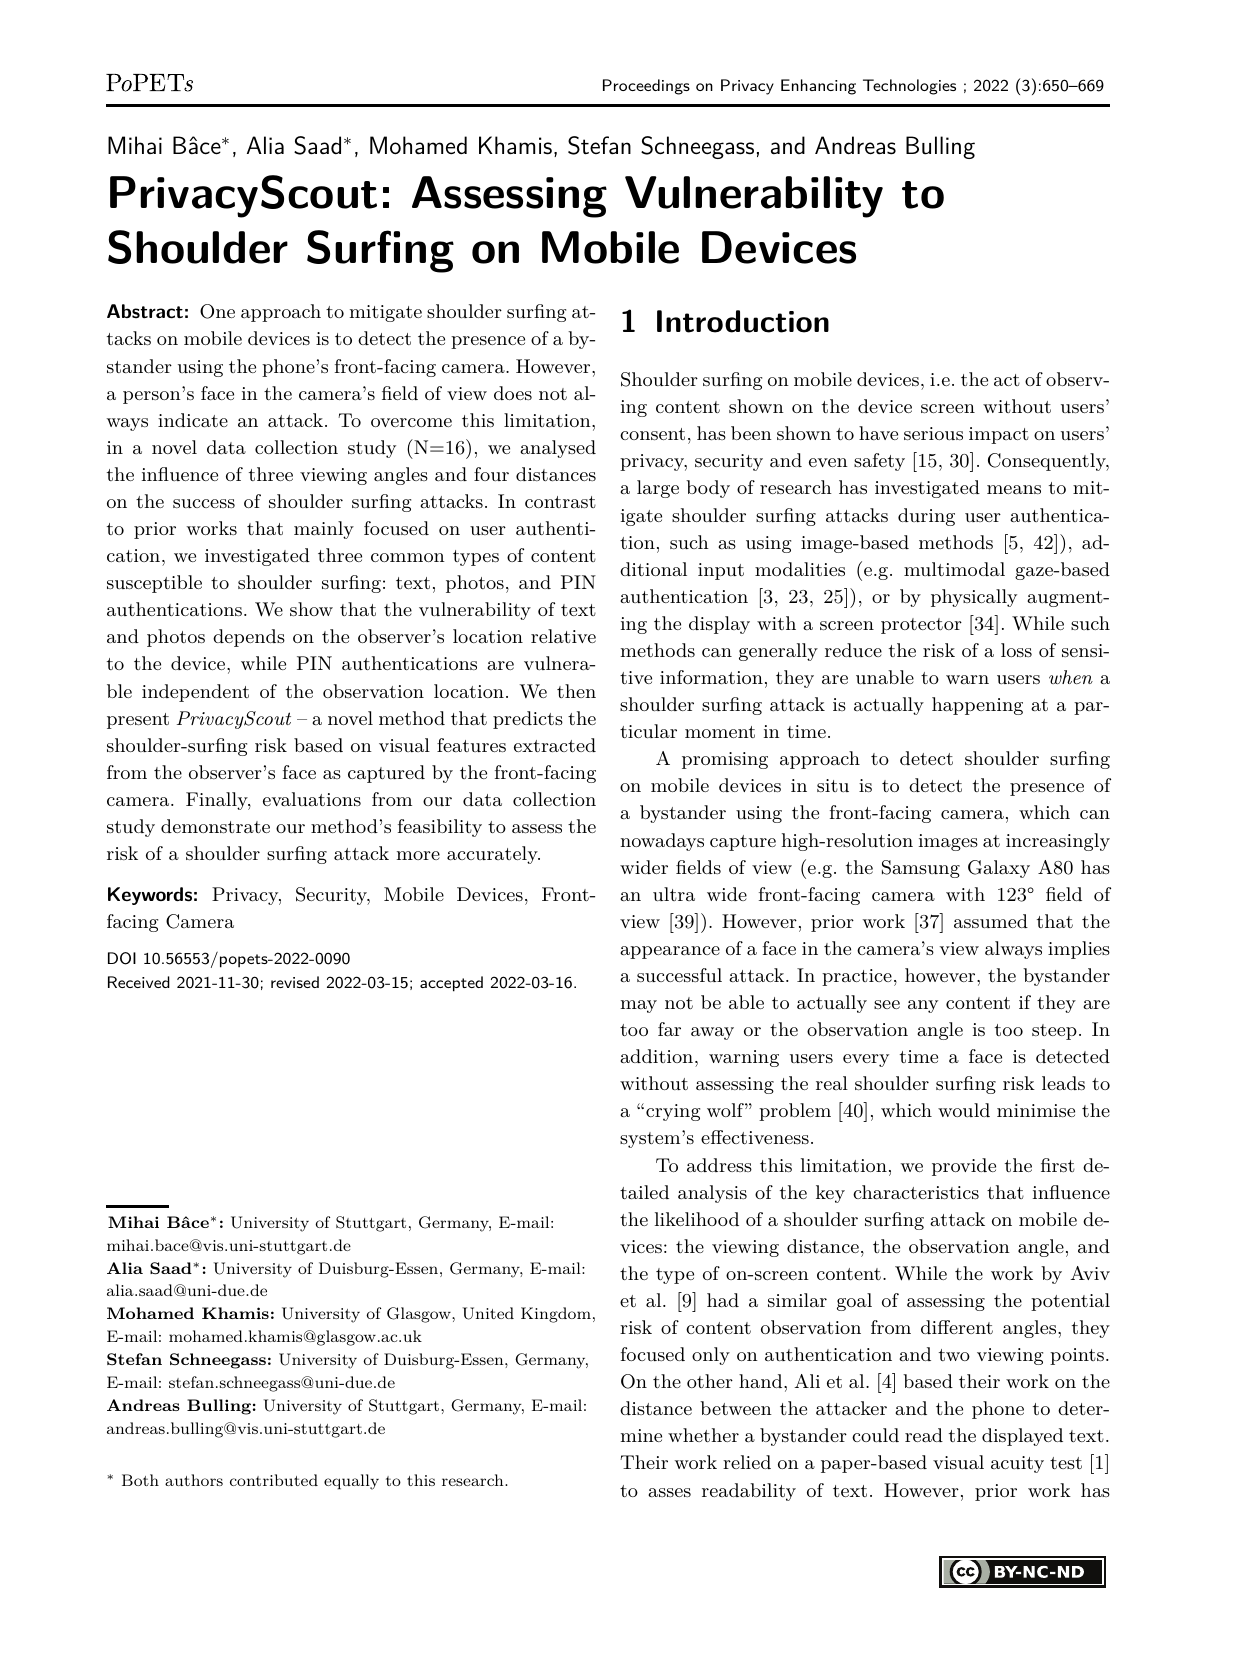 PrivacyScout: Assessing Vulnerability to Shoulder Surfing on Mobile Devices